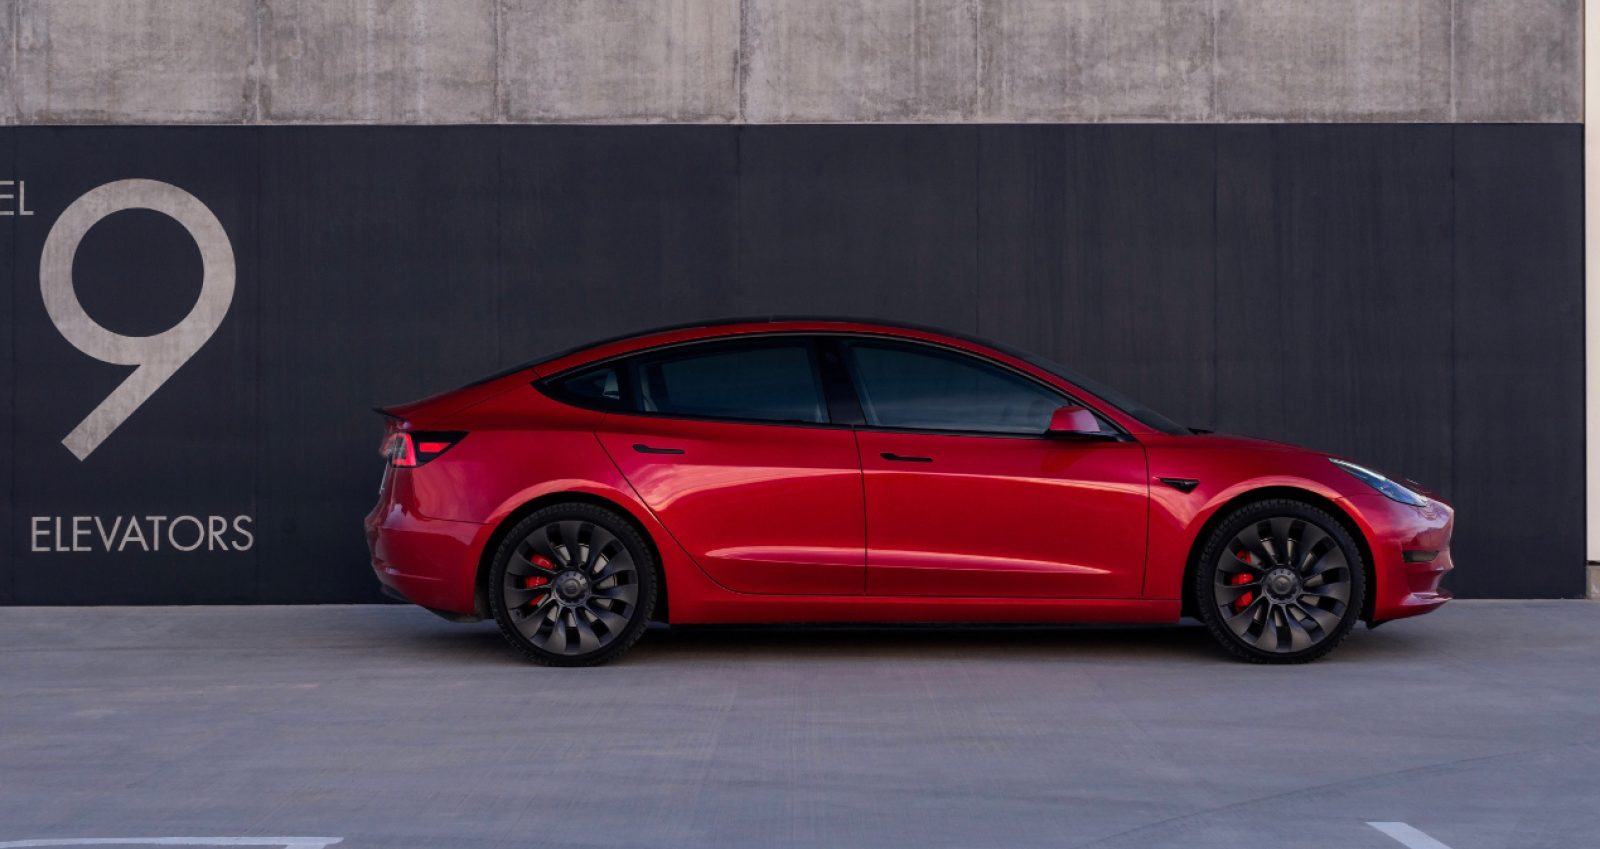 Tesla is officially losing half $7,500 tax credit on two Model 3 trims